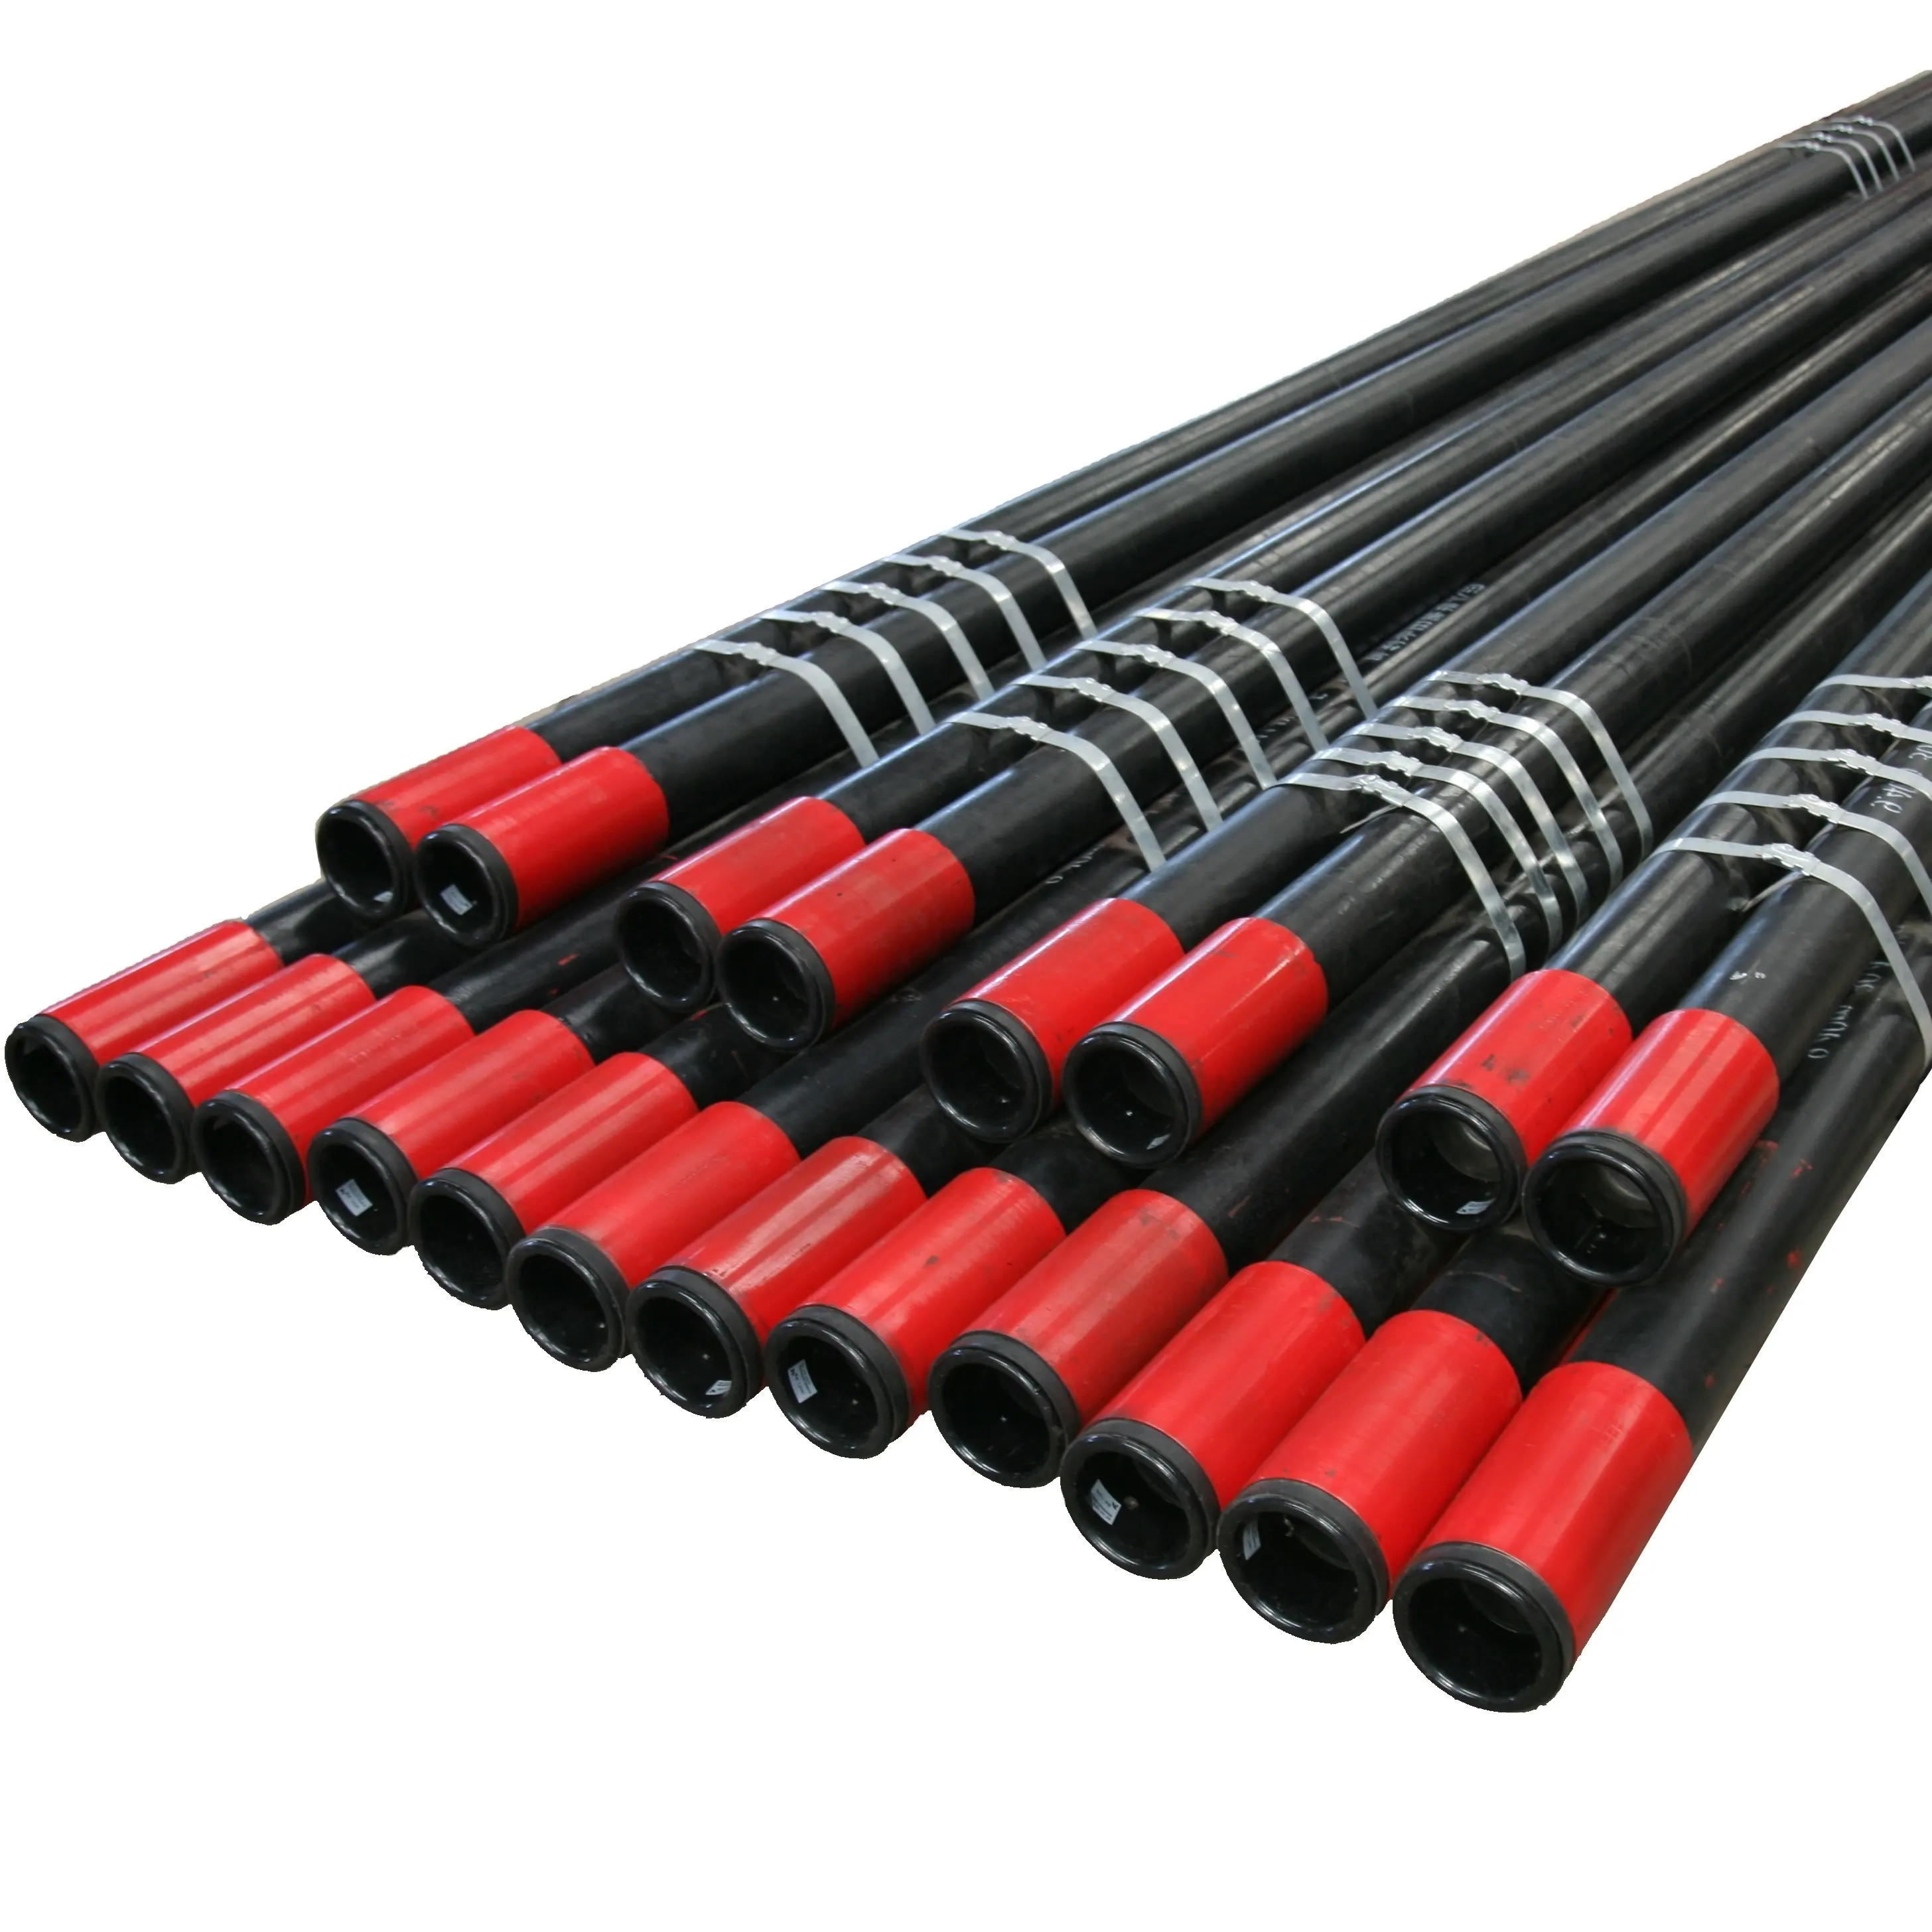 VIT High temperature vacuum insulated tubing and casing with insulating coupling and material